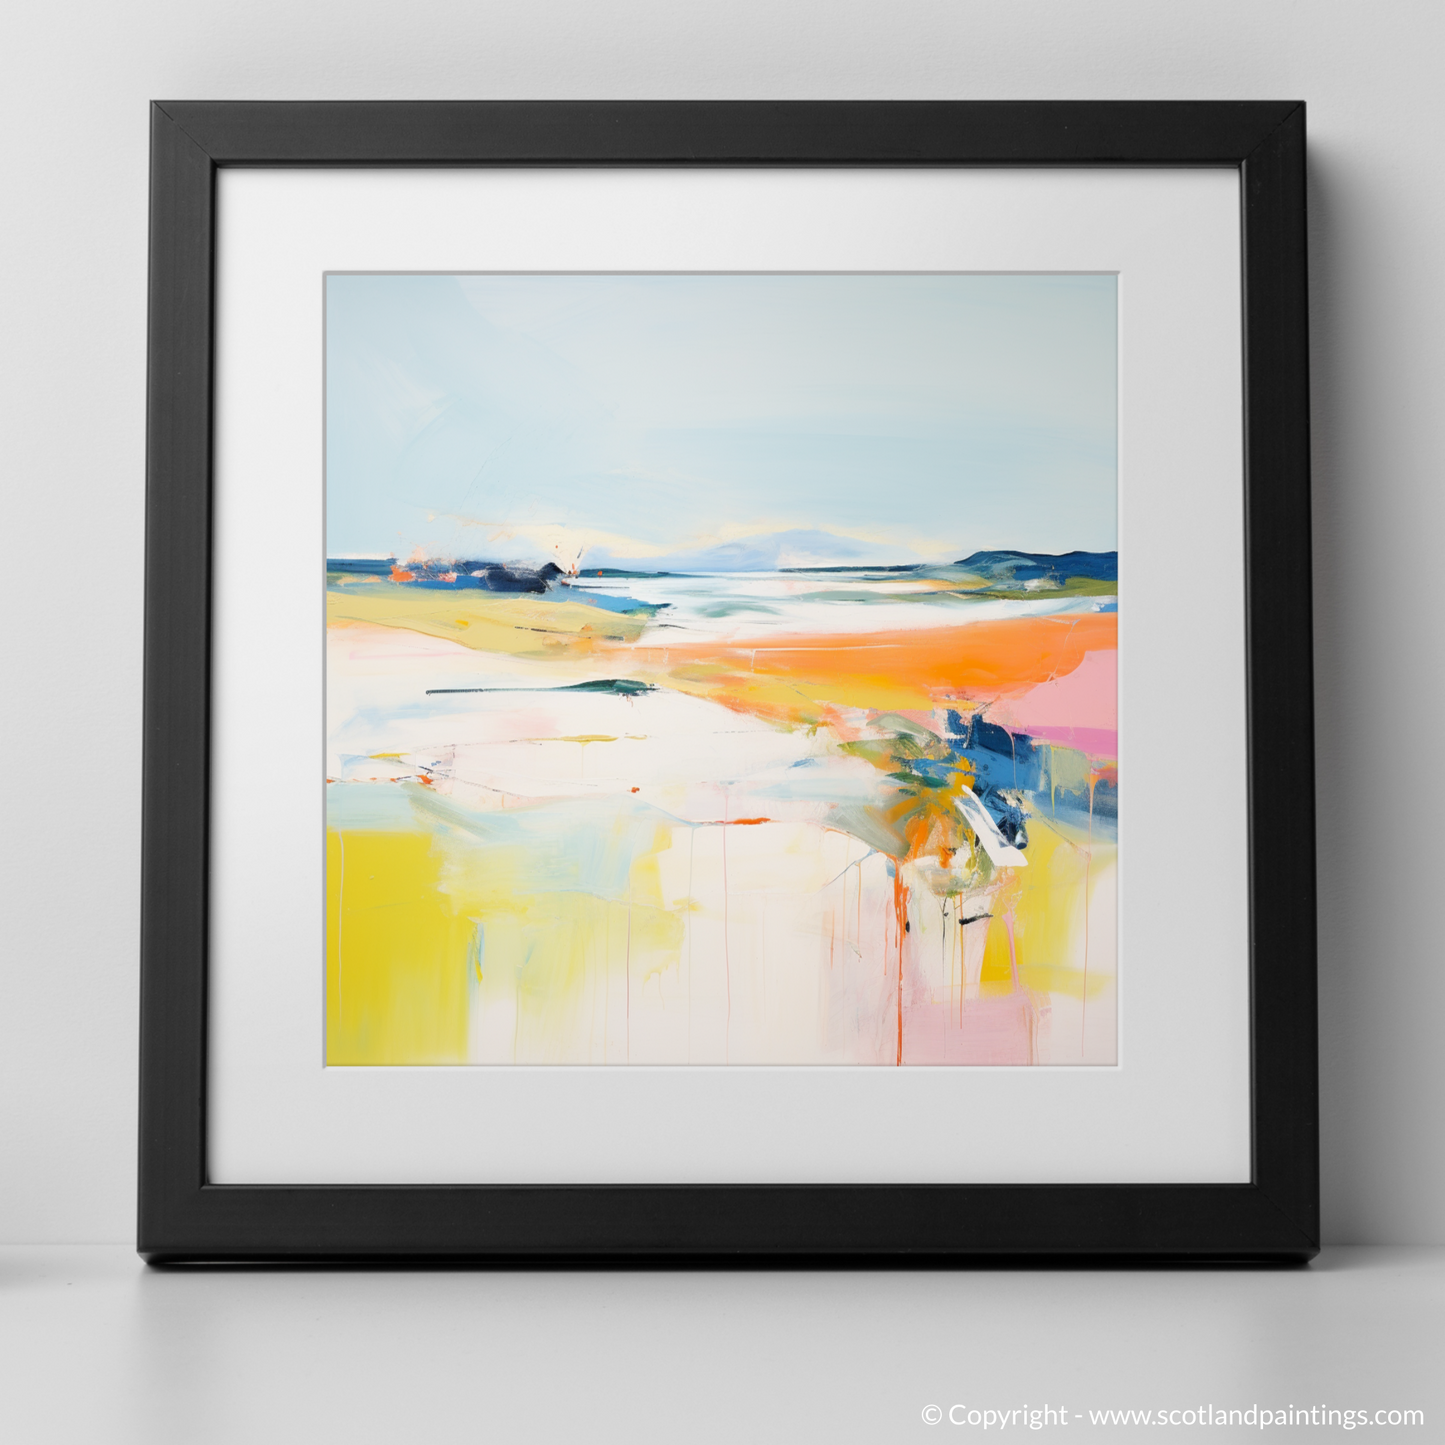 Art Print of Isle of Tiree, Inner Hebrides in summer with a black frame